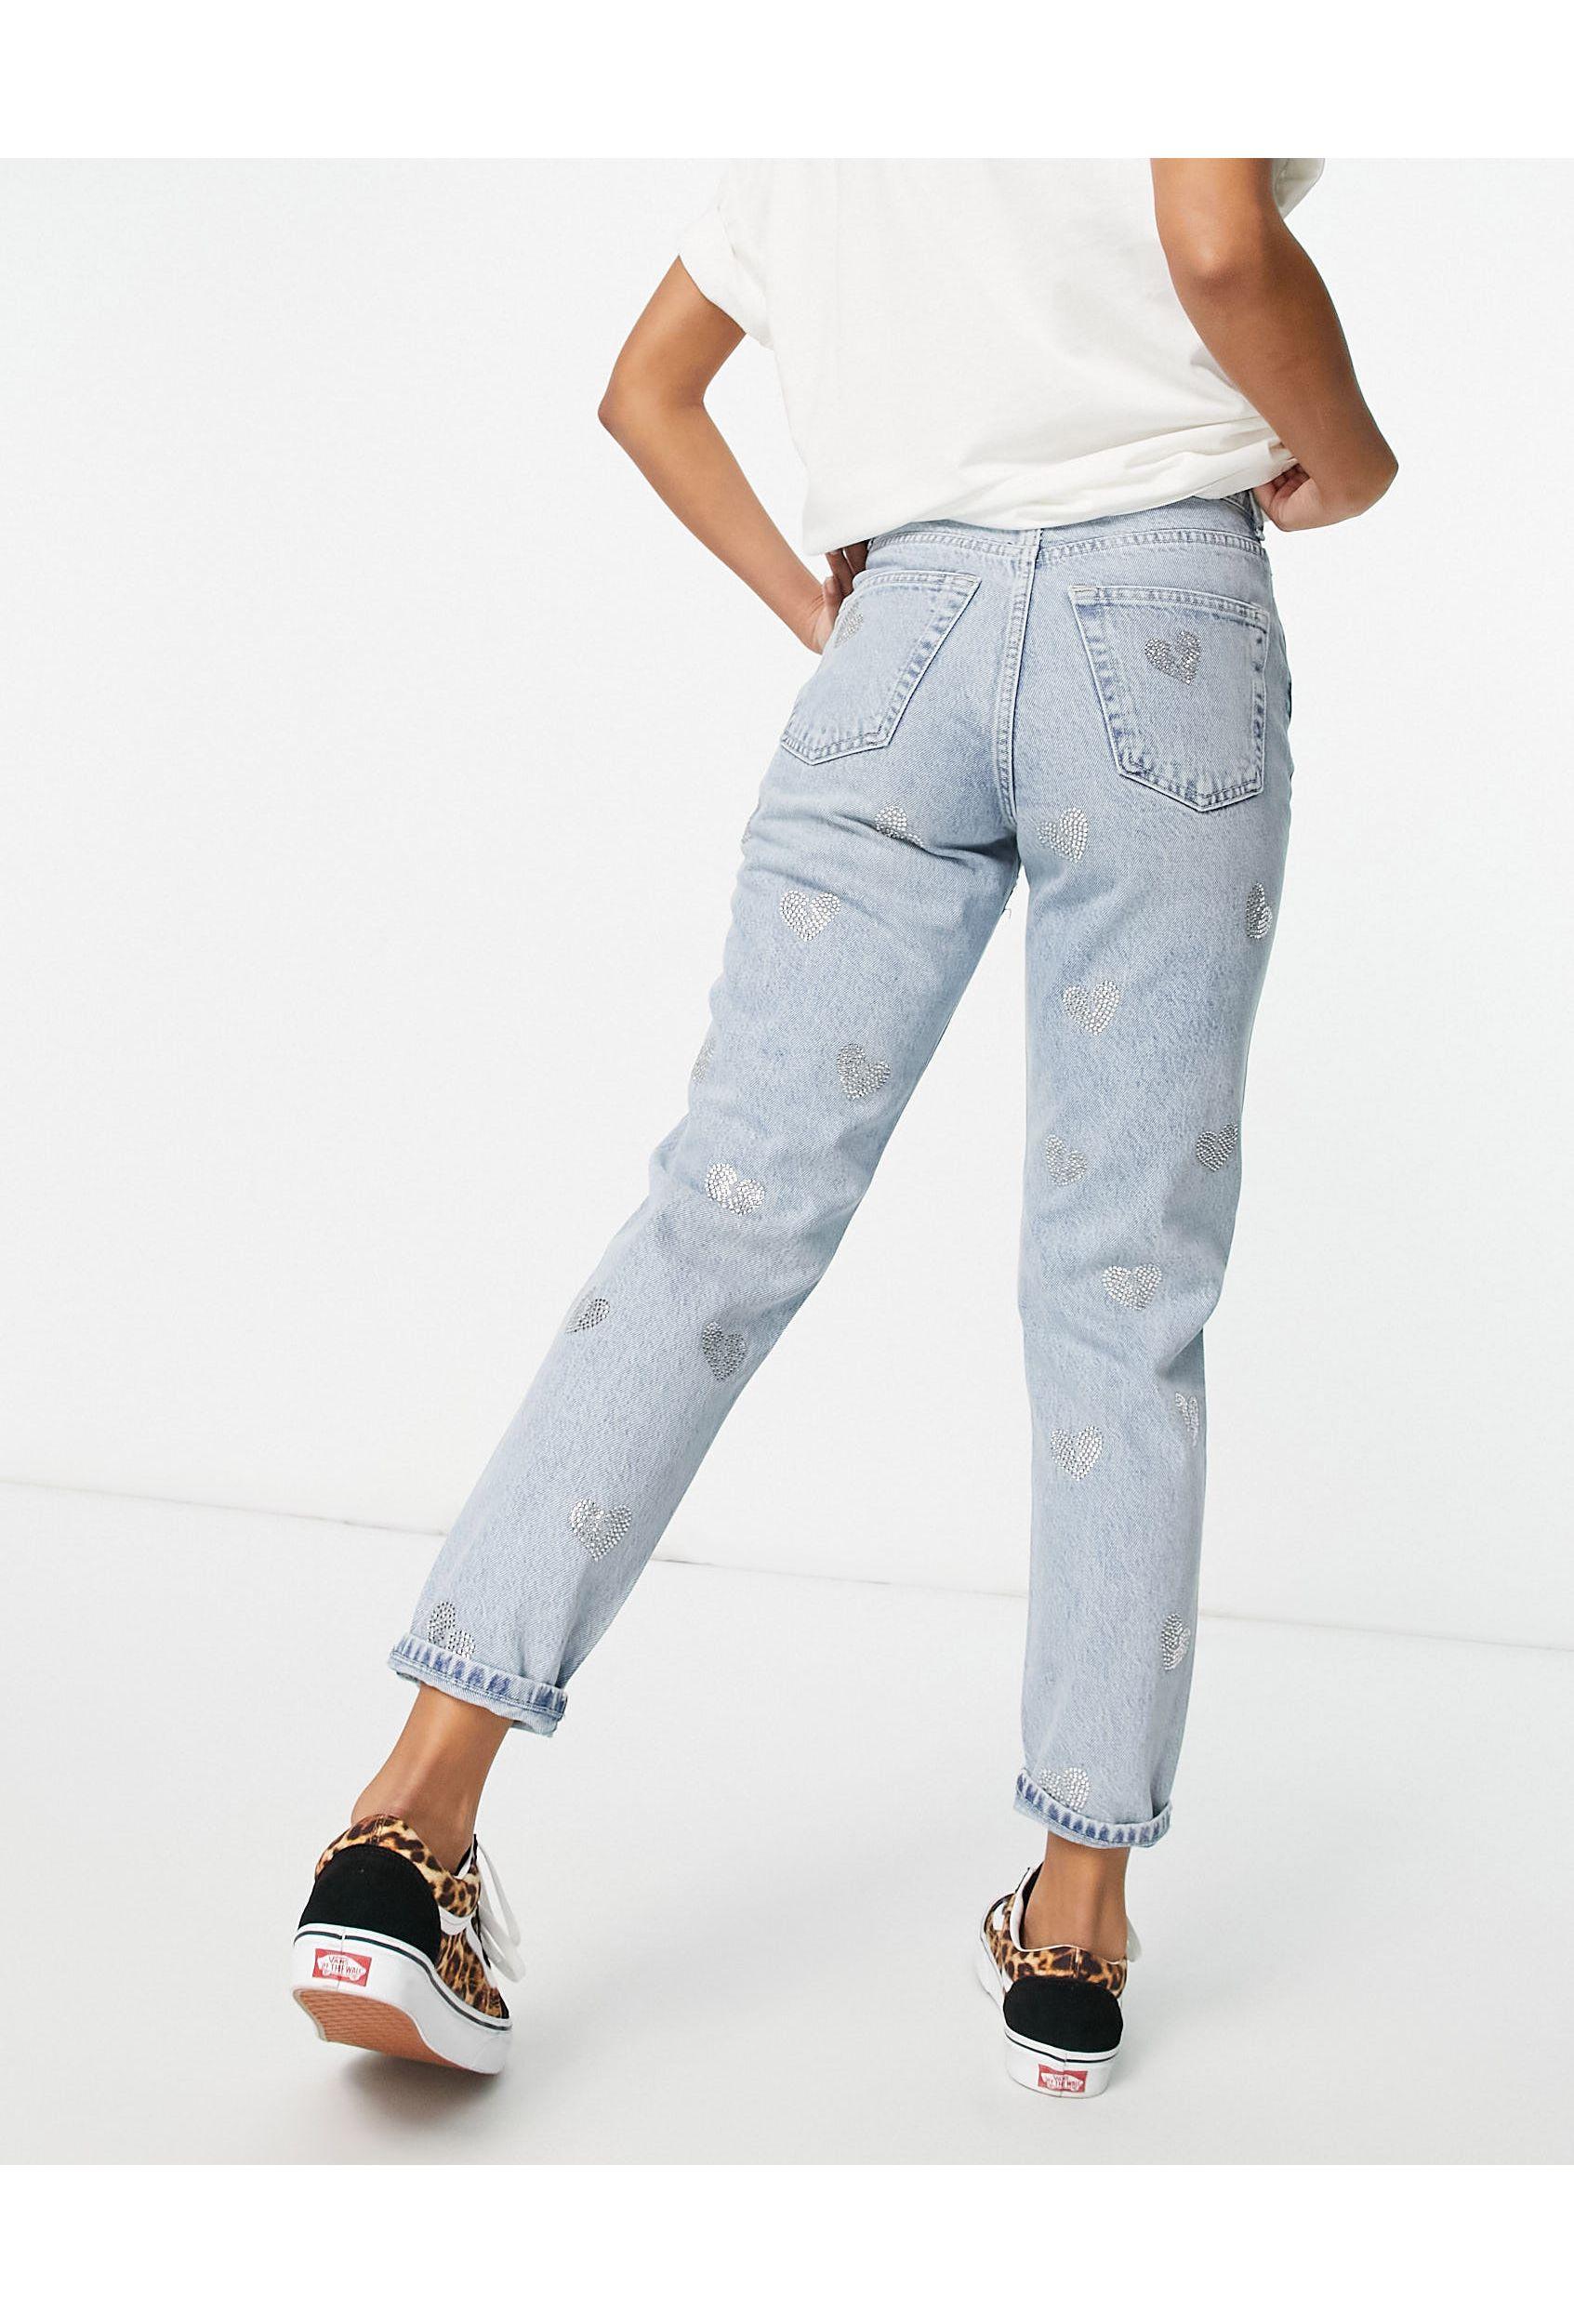 TOPSHOP Denim Mom Jeans With Diamante Hearts in Blue - Lyst